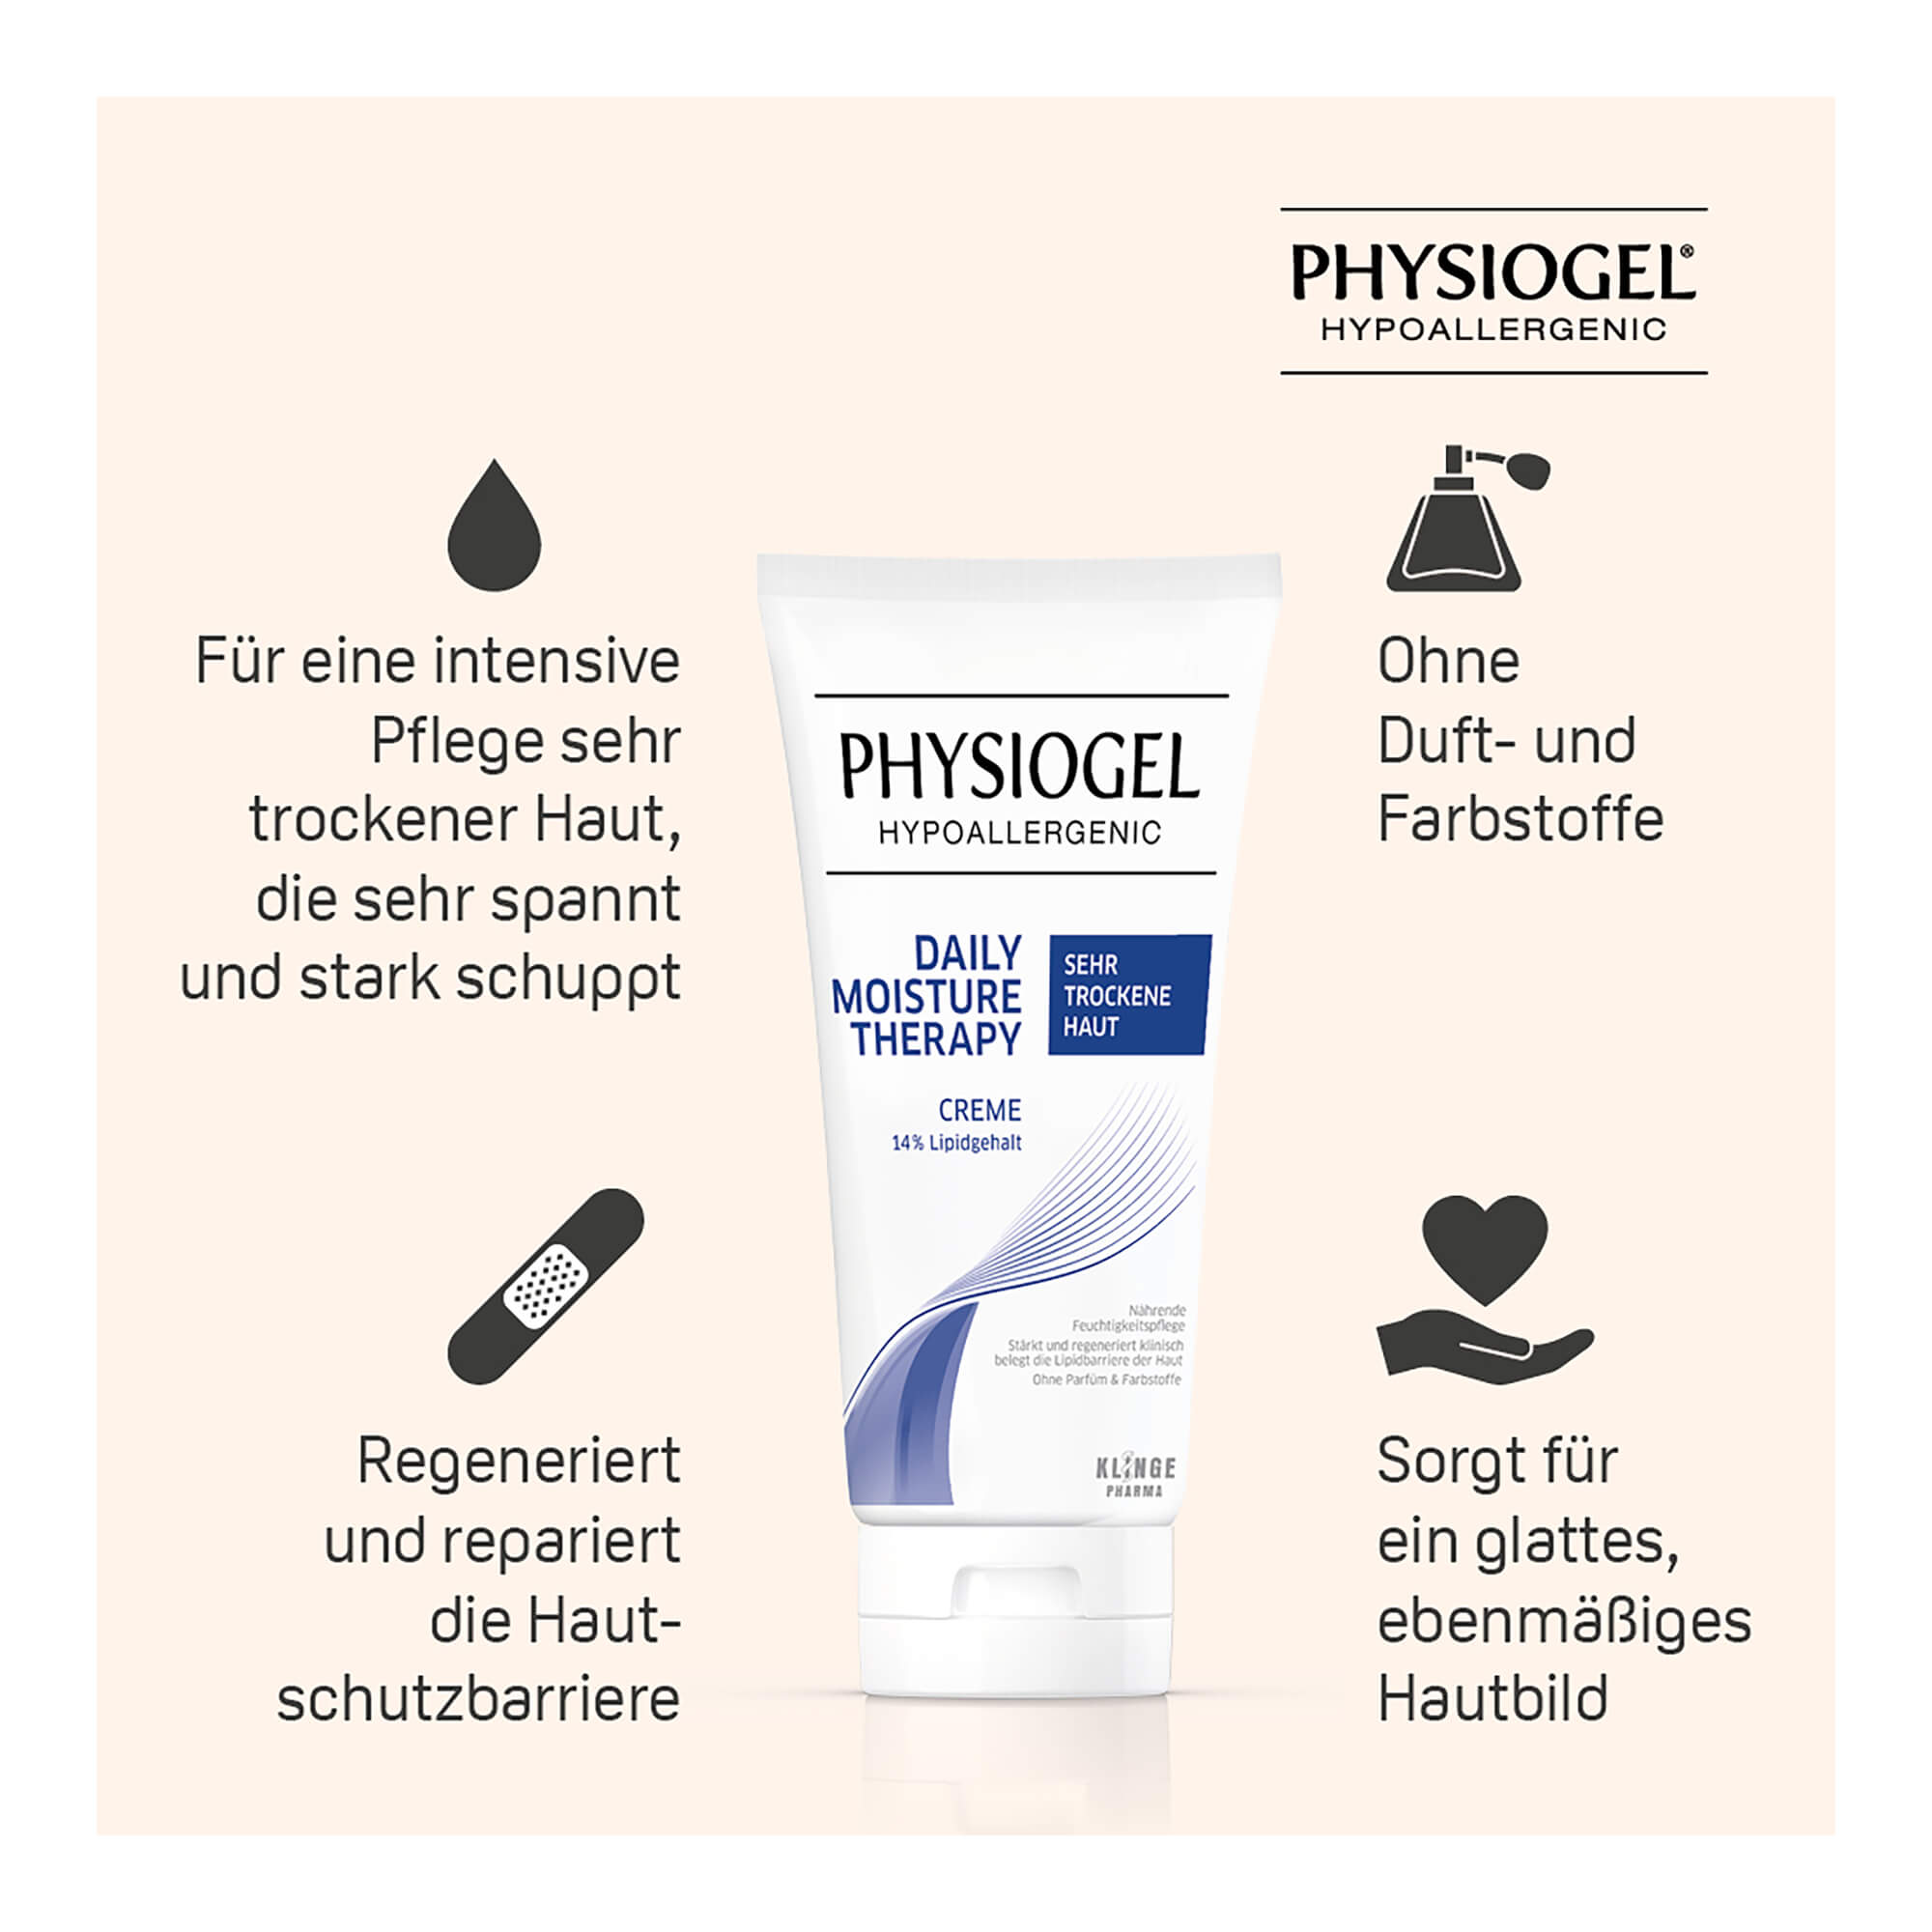 PHYSIOGEL Daily Moisture Therapy Creme sehr trockene Haut